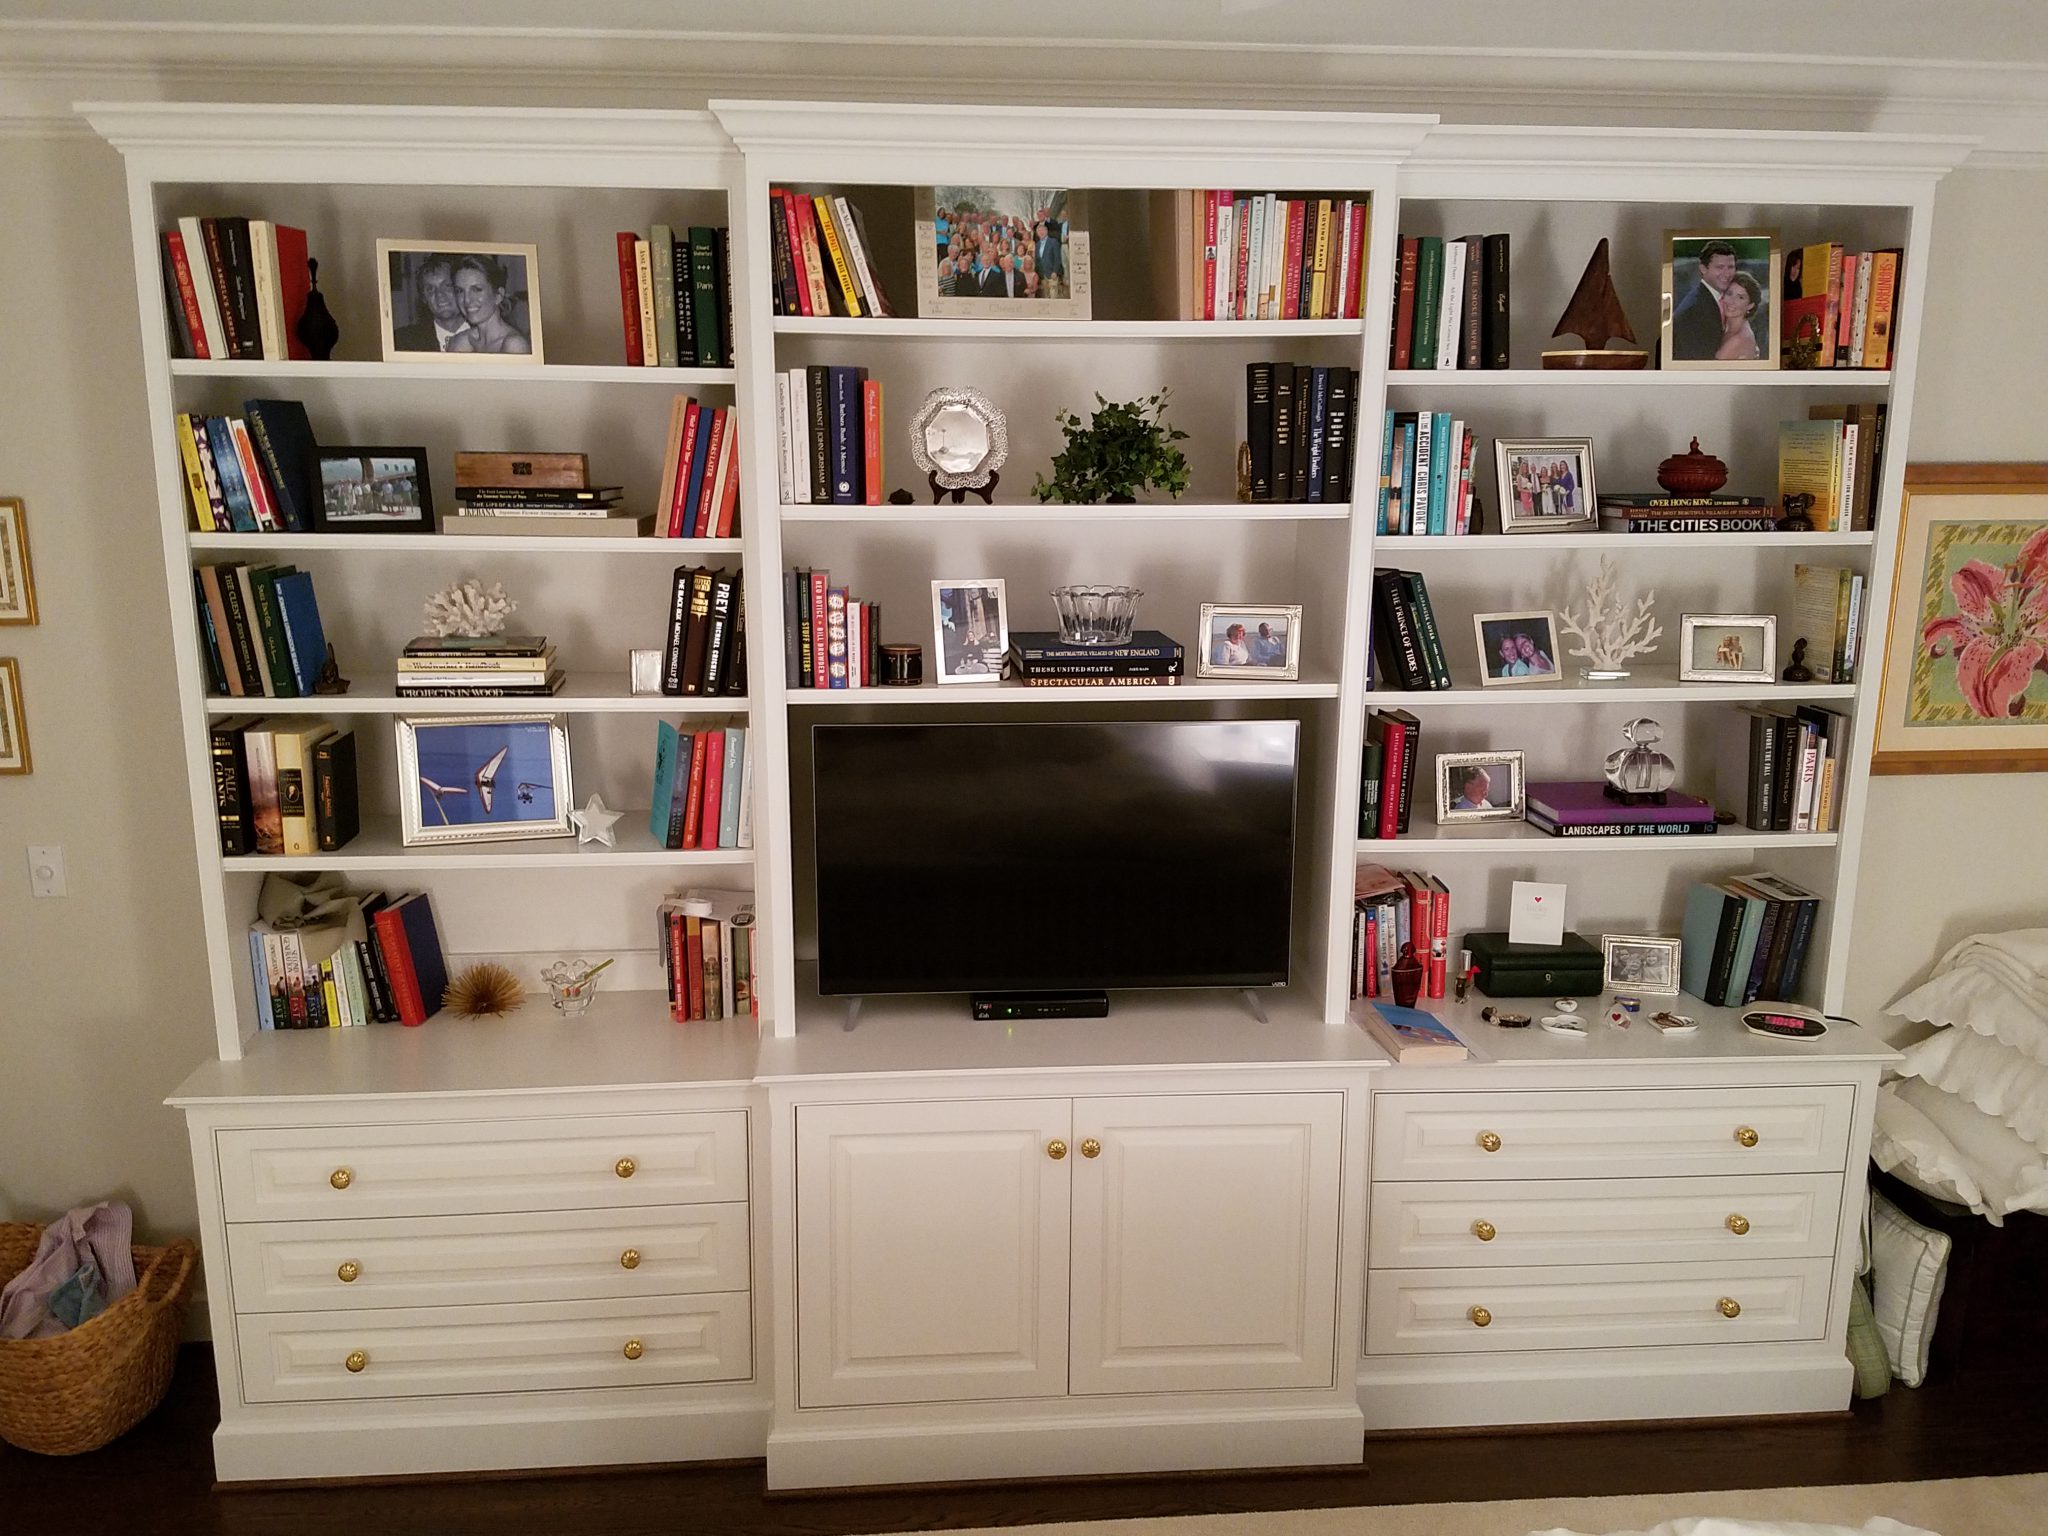 Built-in bookcase with entertainment and storage